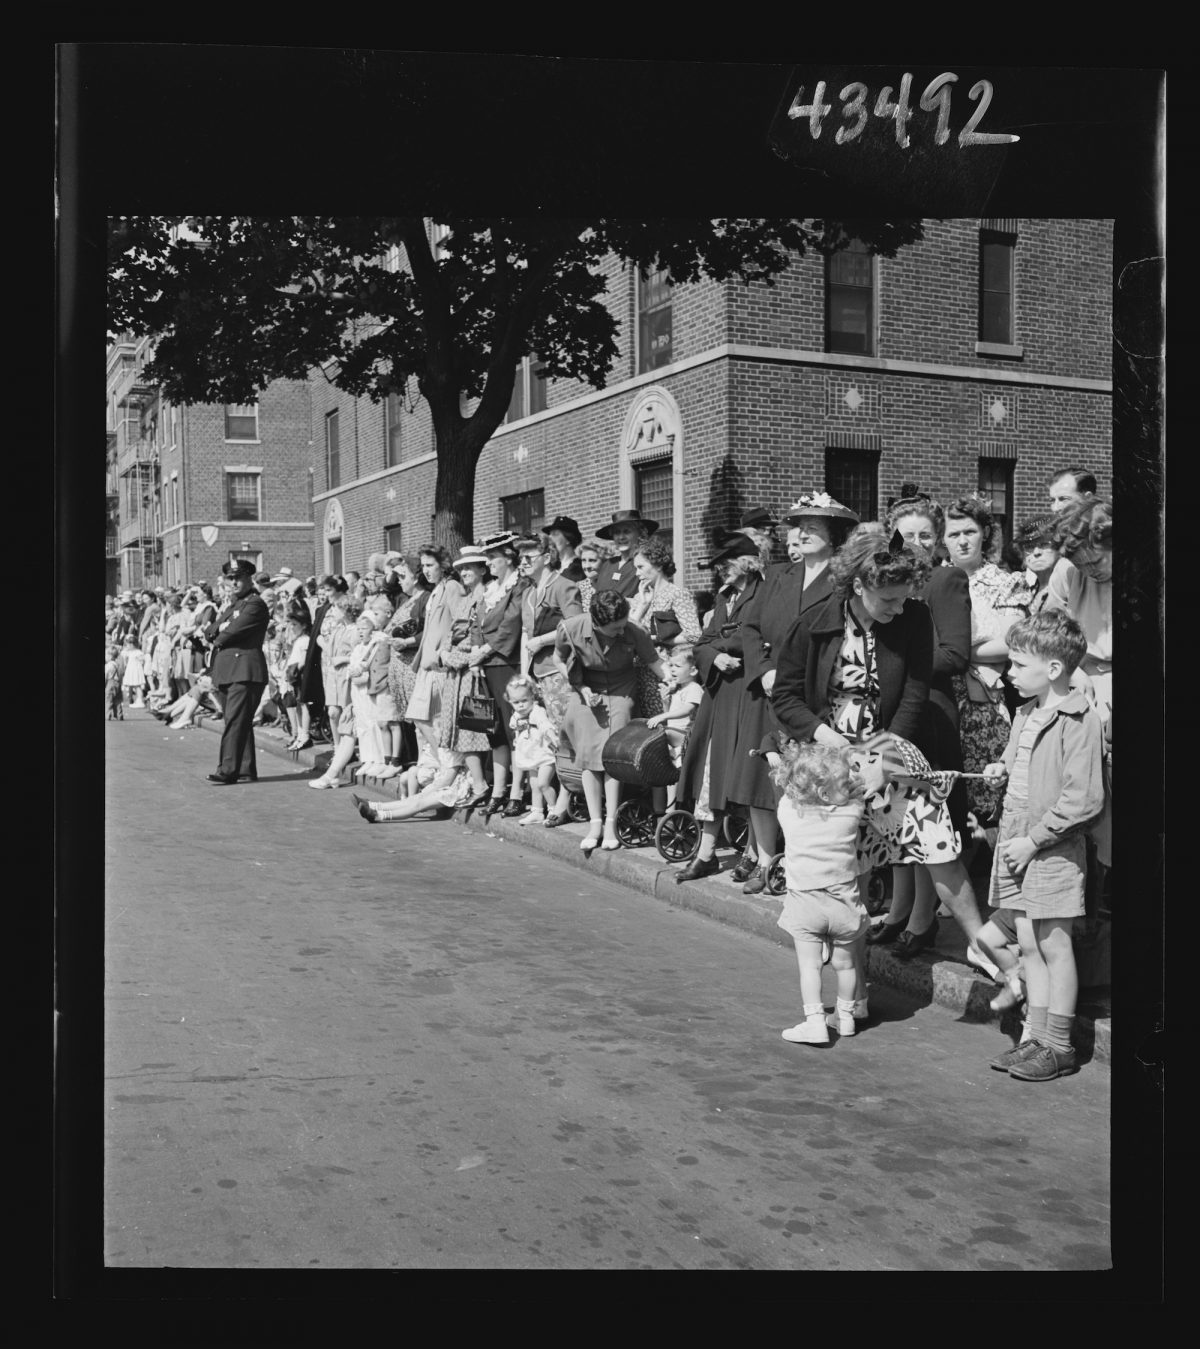 Title: Brooklyn, New York. Crowds watching the Anniversary Day parade of the Sunday school of the Church of the Good Shepherd Creator(s): Hollem, Howard R., photographer Date Created/Published: 1944 June.